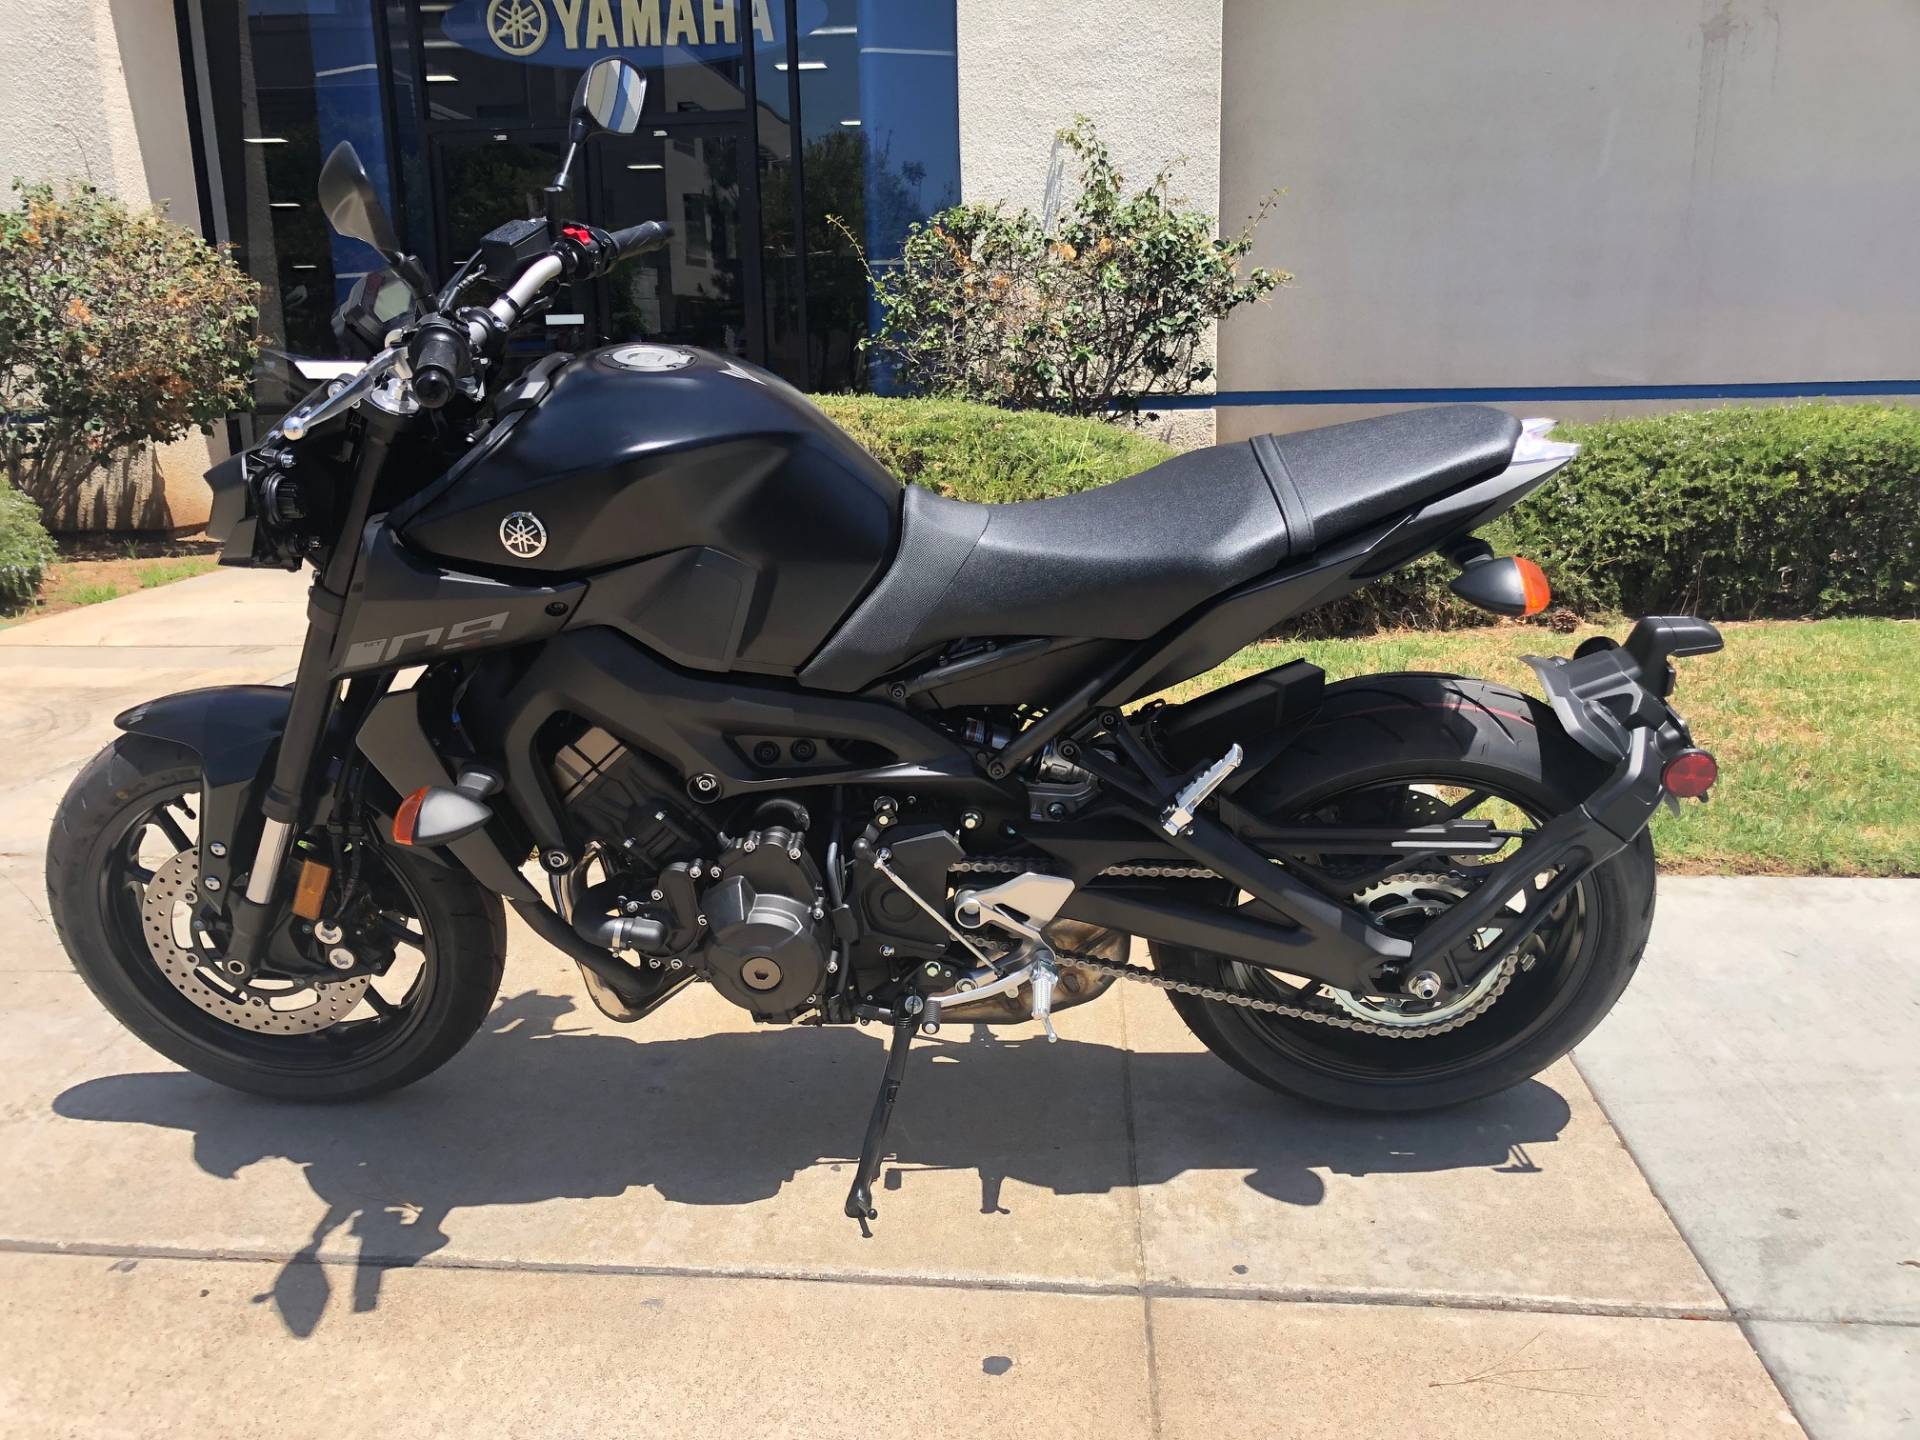 2020 Yamaha MT-09 for sale in Bakersfield, CA. Valley 